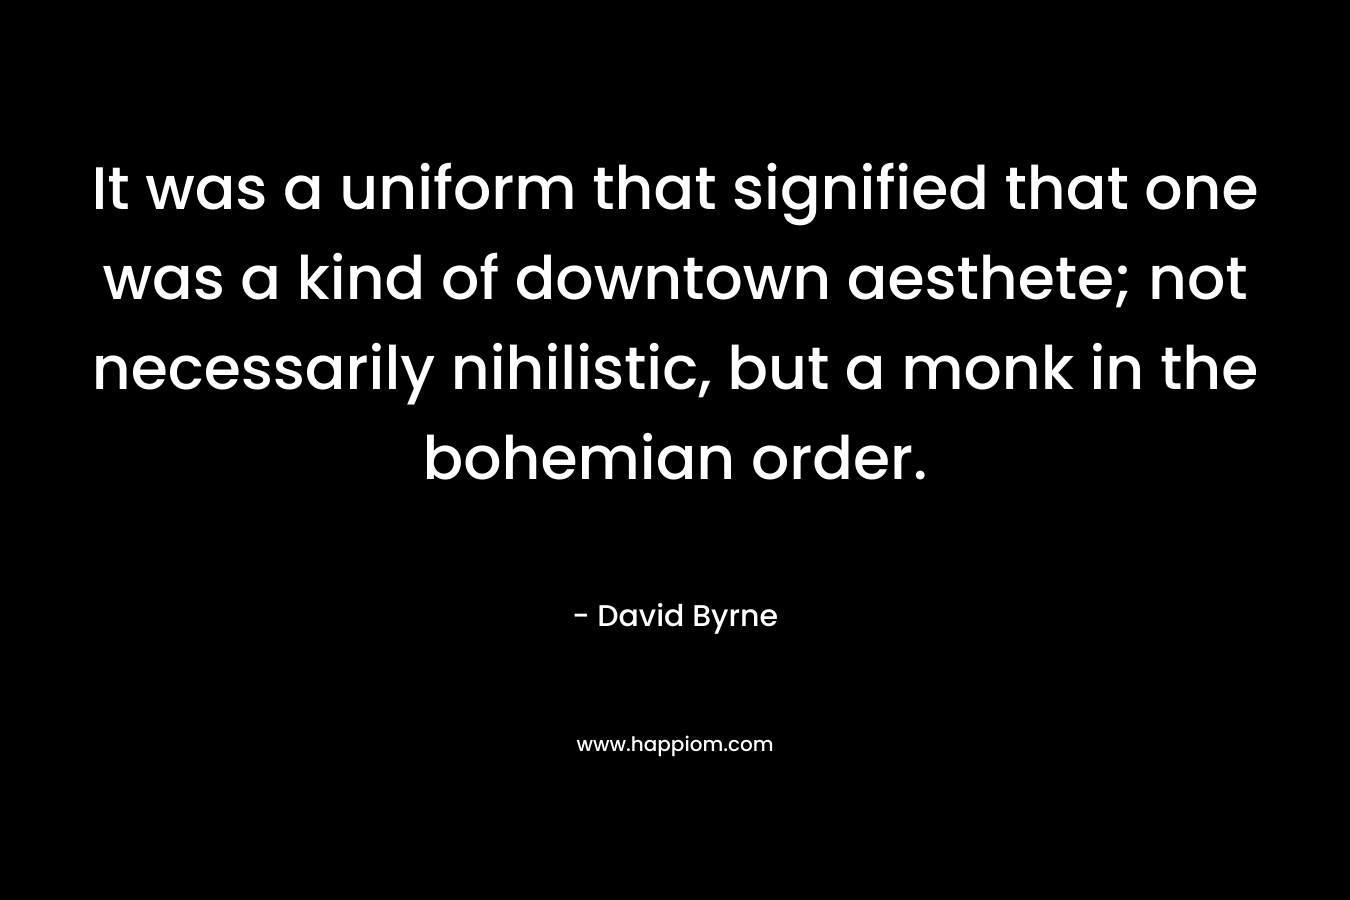 It was a uniform that signified that one was a kind of downtown aesthete; not necessarily nihilistic, but a monk in the bohemian order. – David Byrne